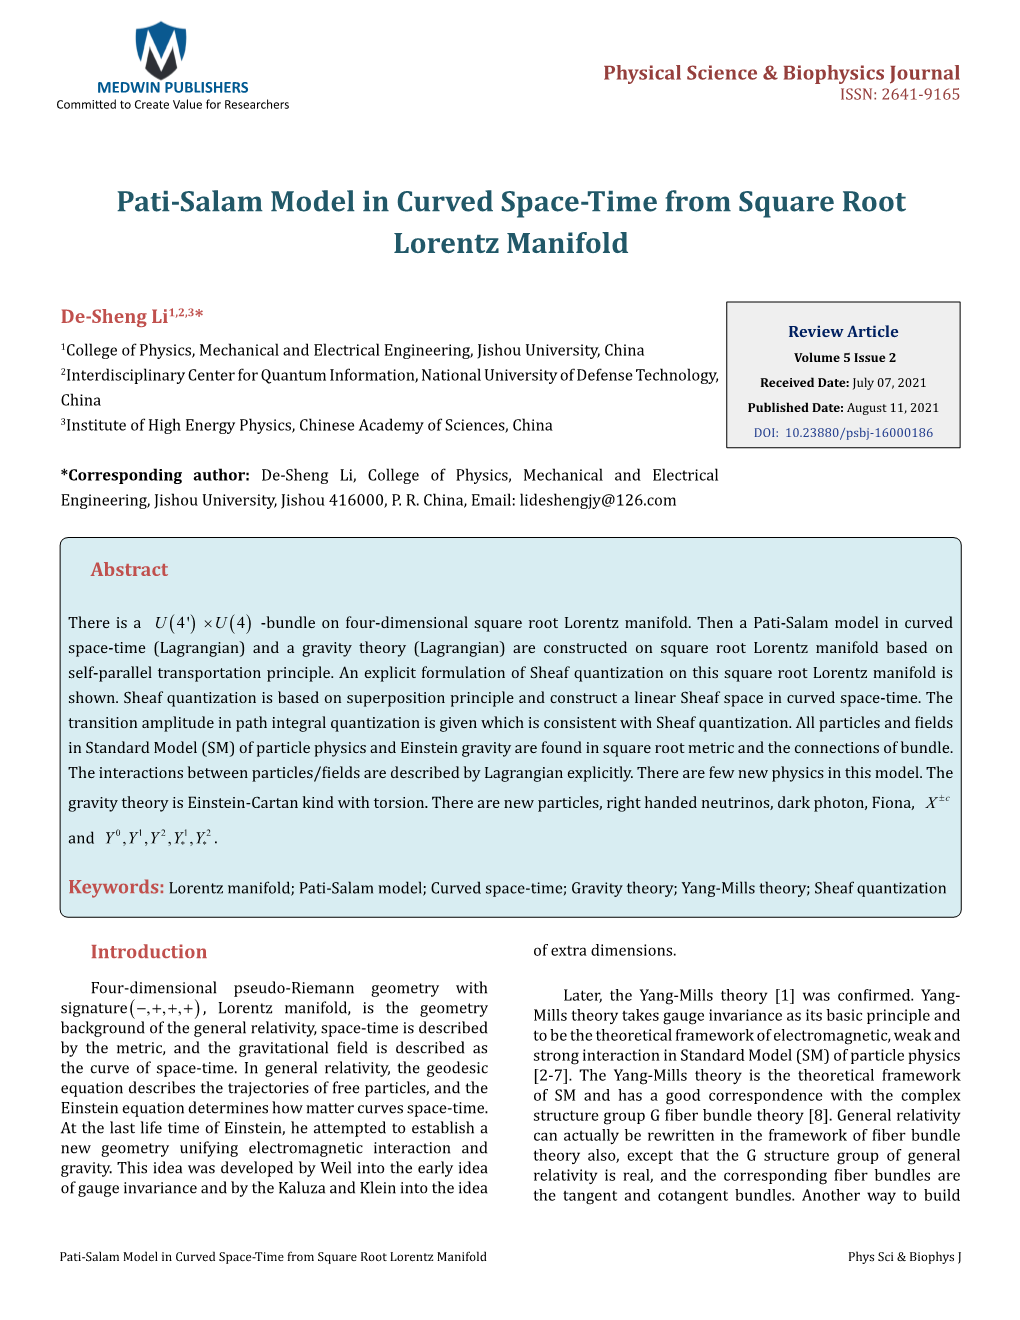 De-Sheng Li. Pati-Salam Model in Curved Space-Time from Square Root Lorentz Manifold